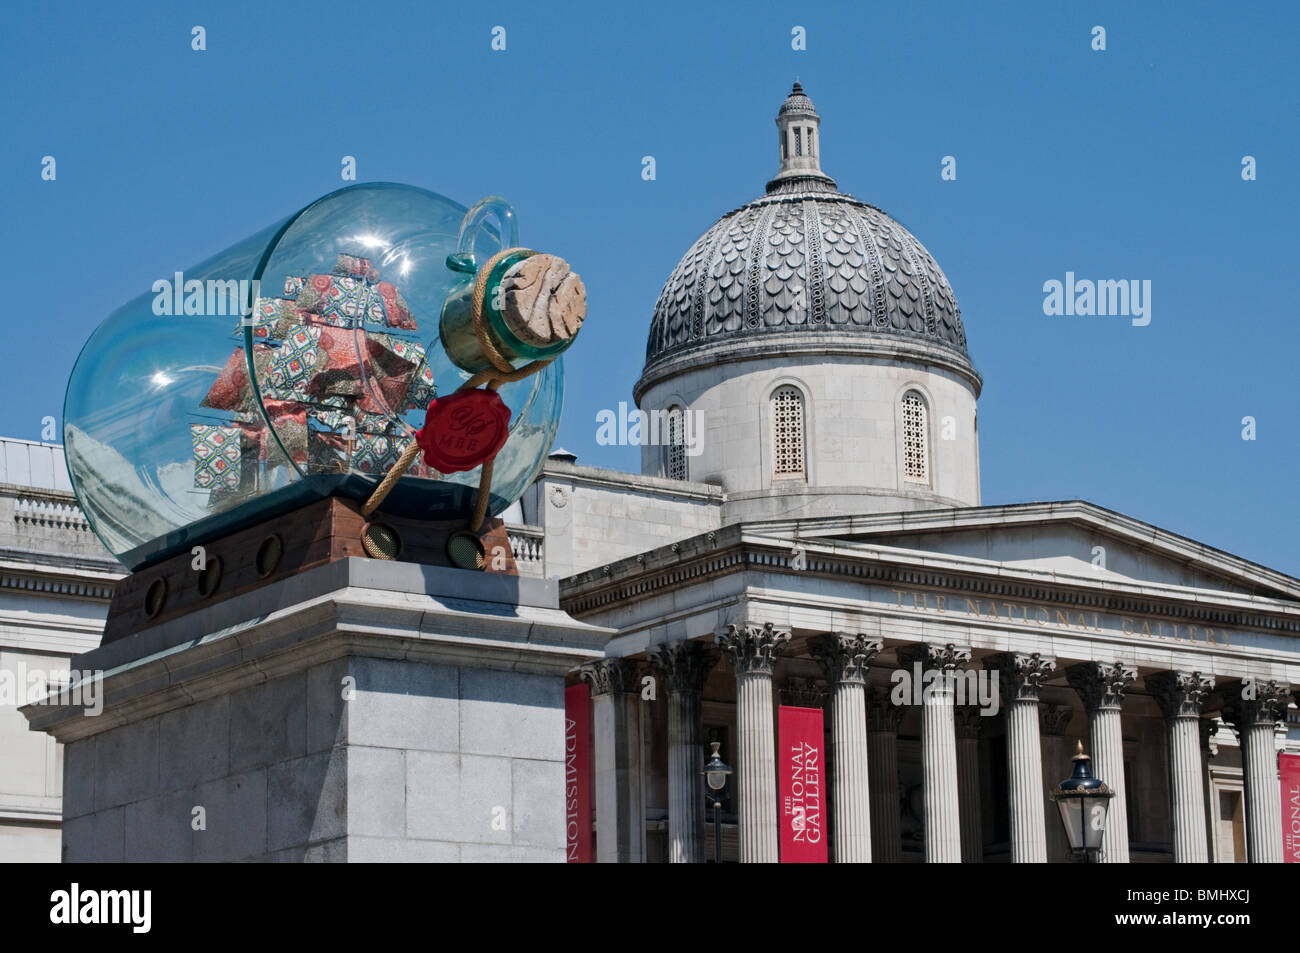 'Nelsons ship in a bottle' by Yinka Shonibare on the forth plinth,Trafalgar Square. Stock Photo